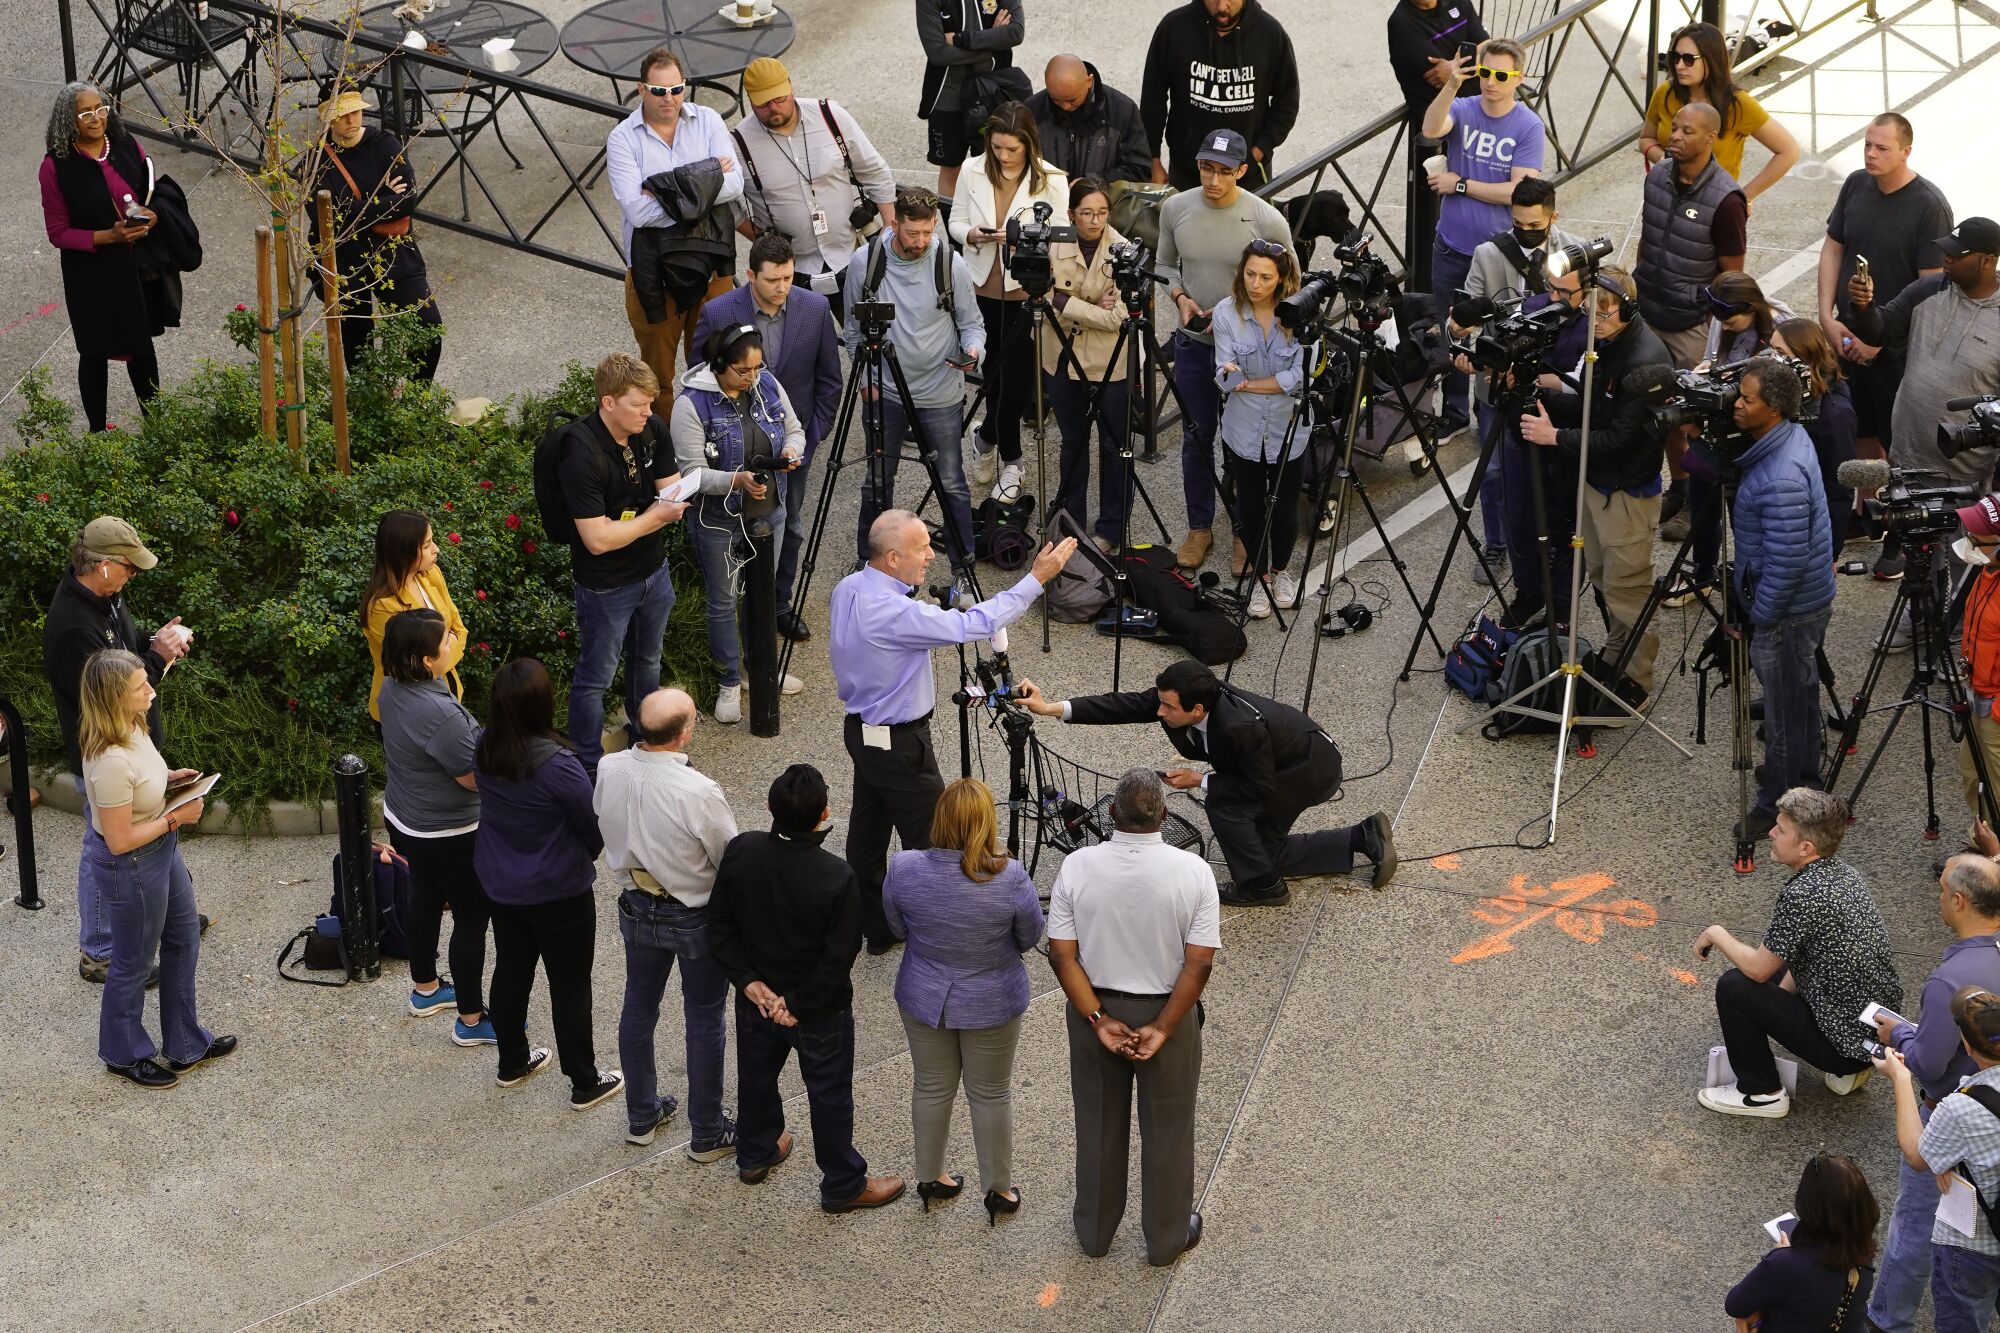 A man standing in front of video cameras speaks to journalists 